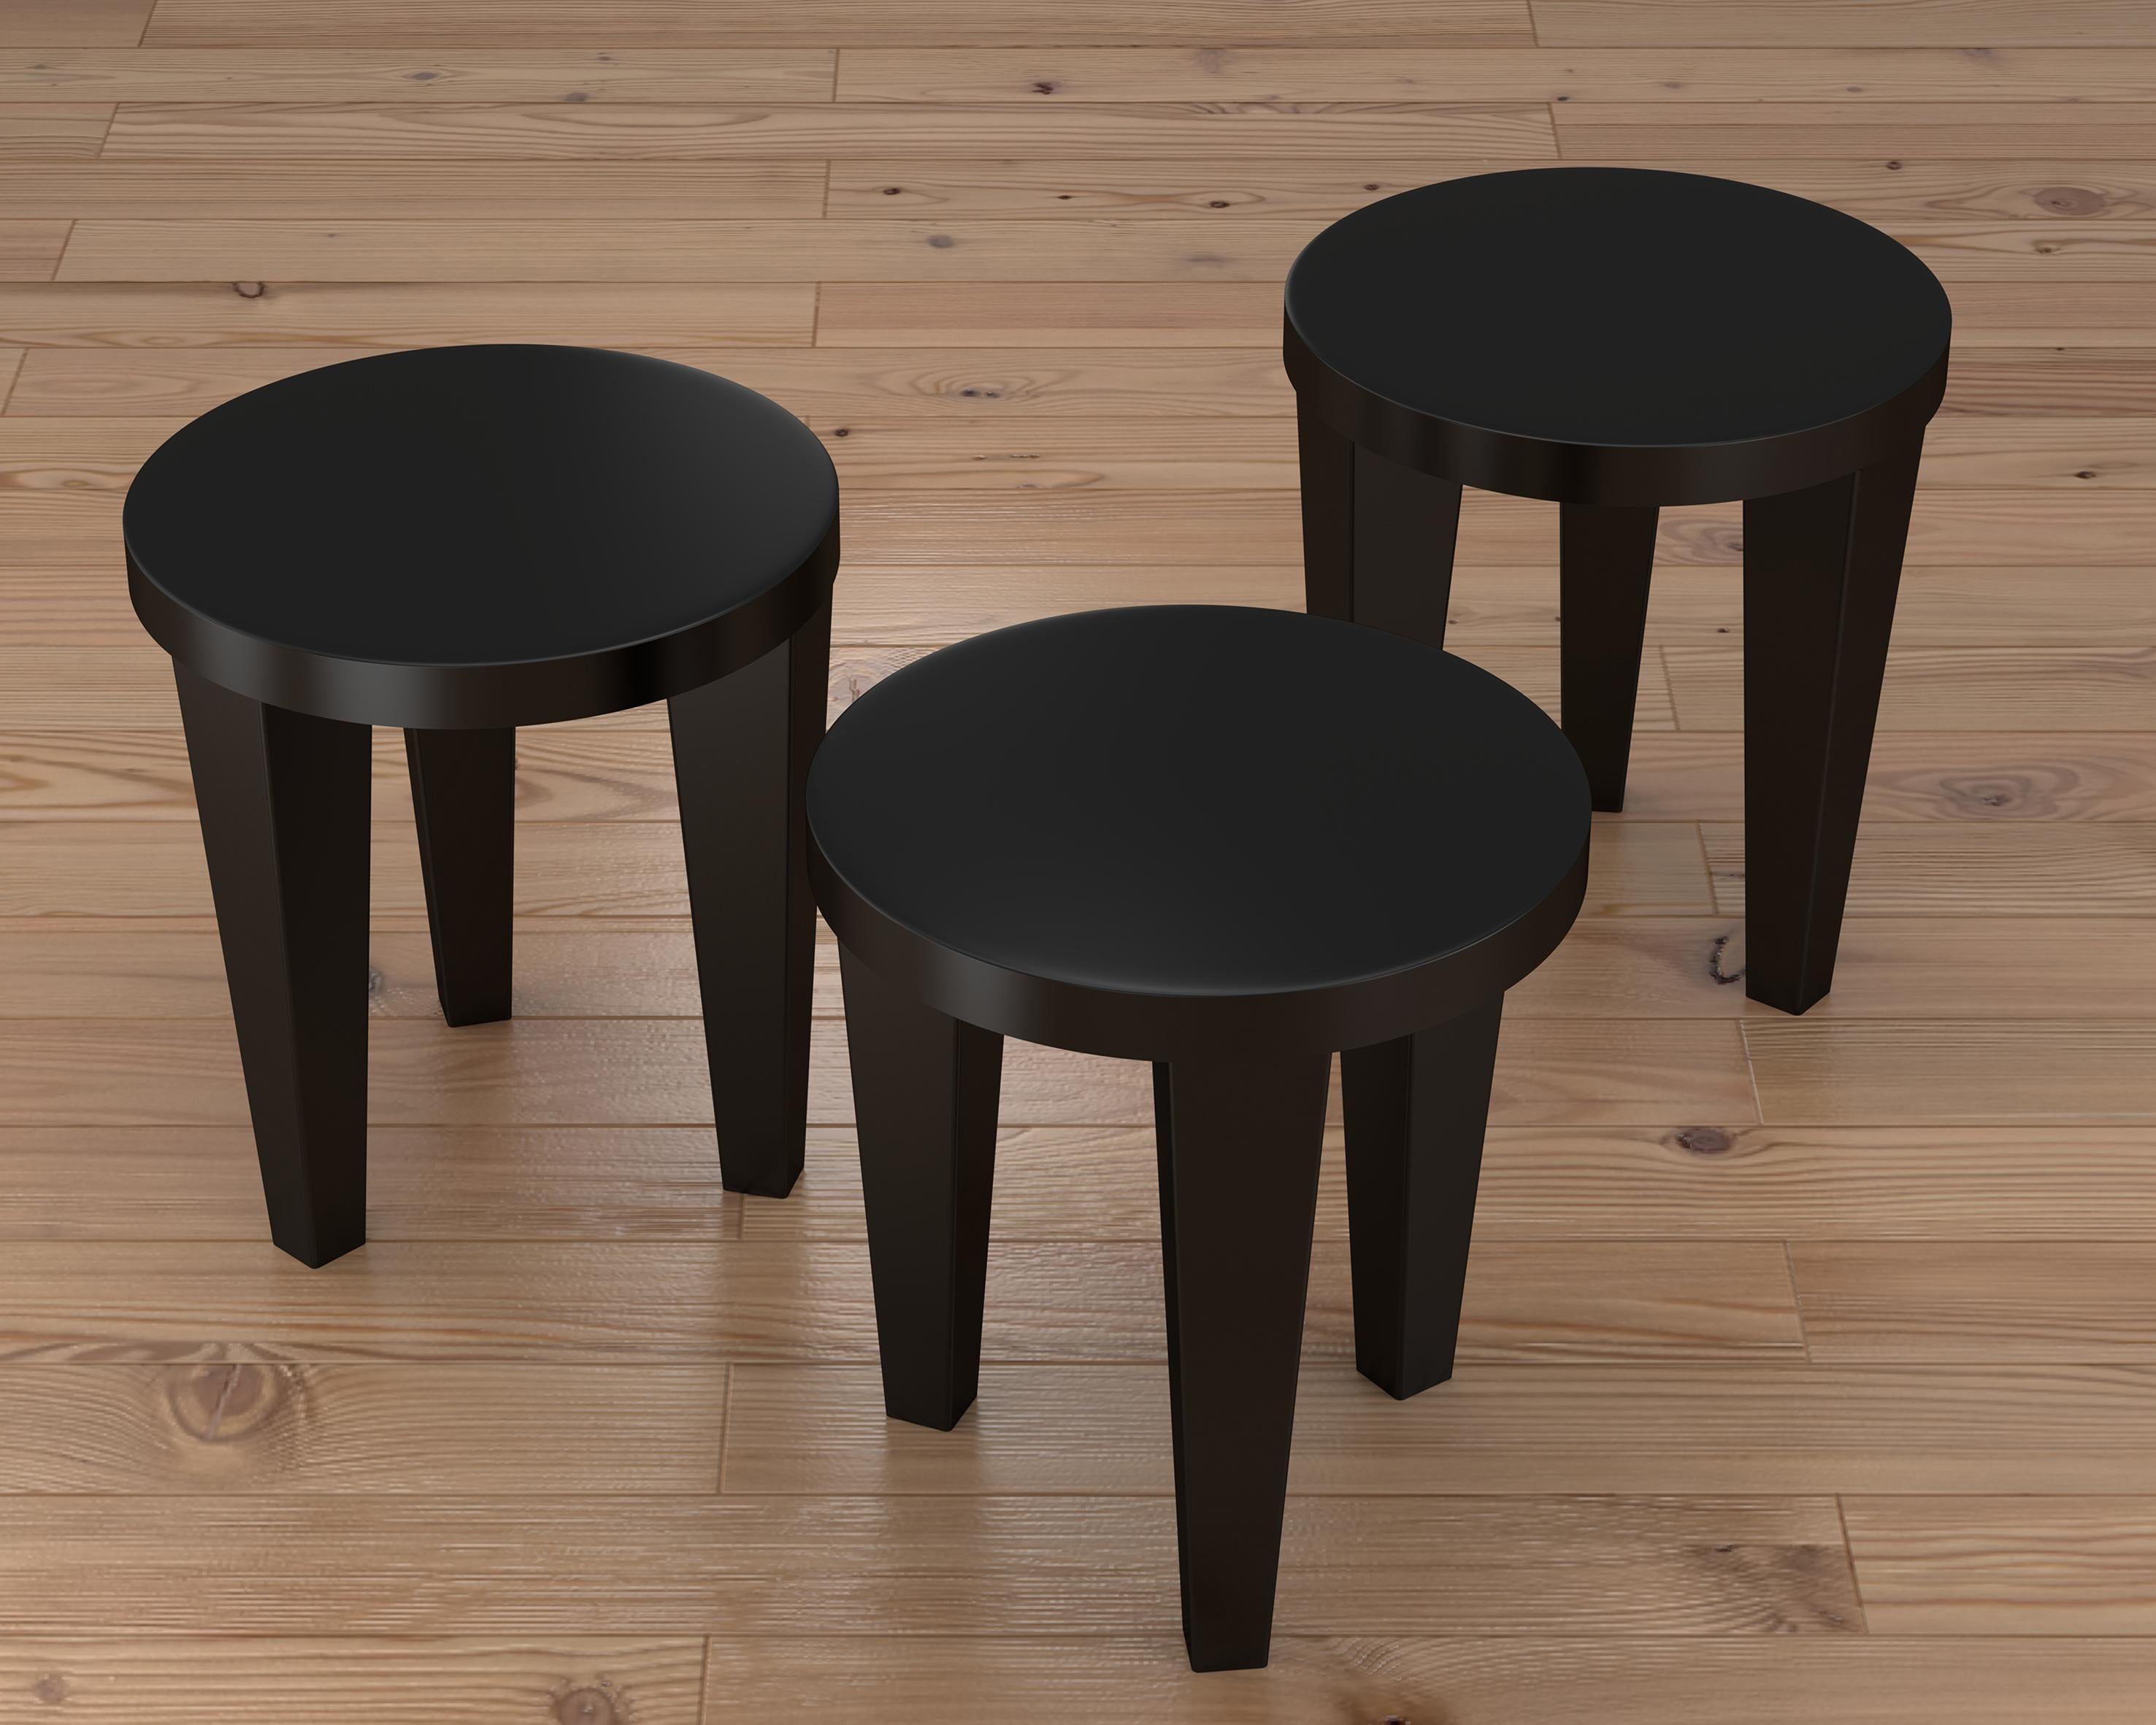 Bob is a contemporary stool suitable as a seat, a side table or a storage unit.

Its geometric structure comprises a round seat supported by three sculptural-section legs.

Bob is entirely made of wood and handcrafted in Italy.

Bob is available in